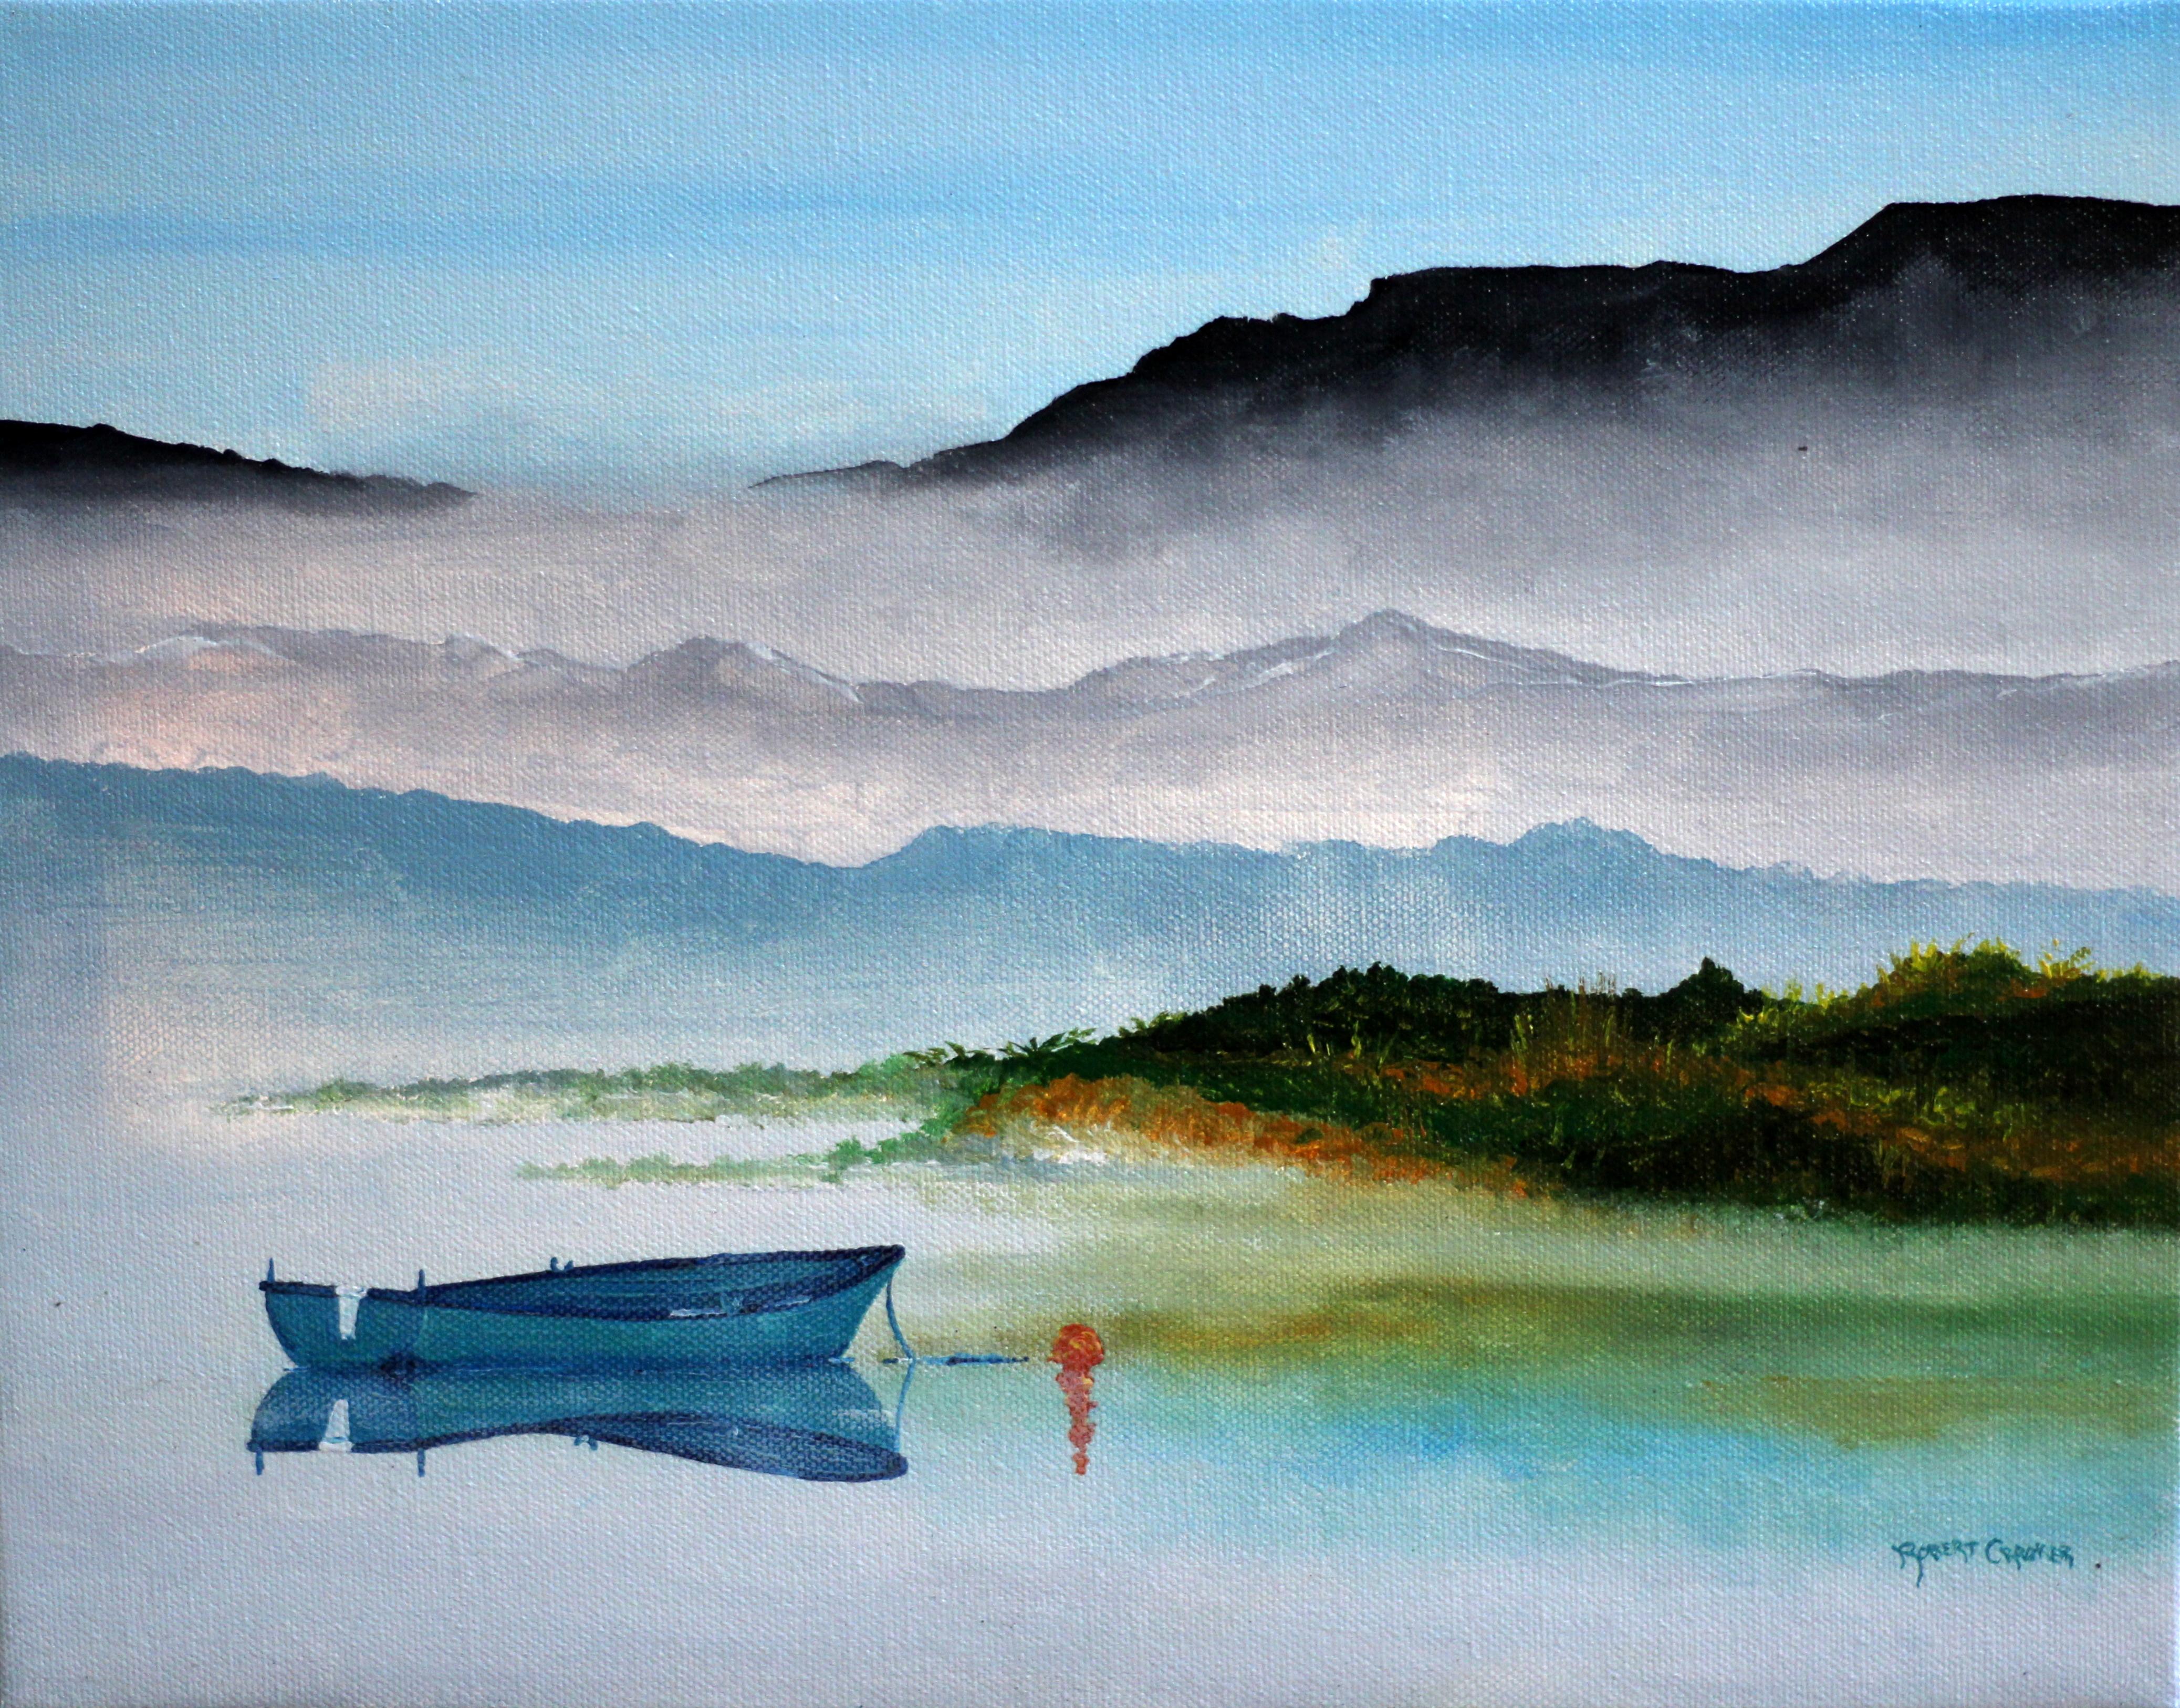 Robert Crooker Landscape Painting - A Lonely Blue Boat, Original Acrylic Painting, 2015